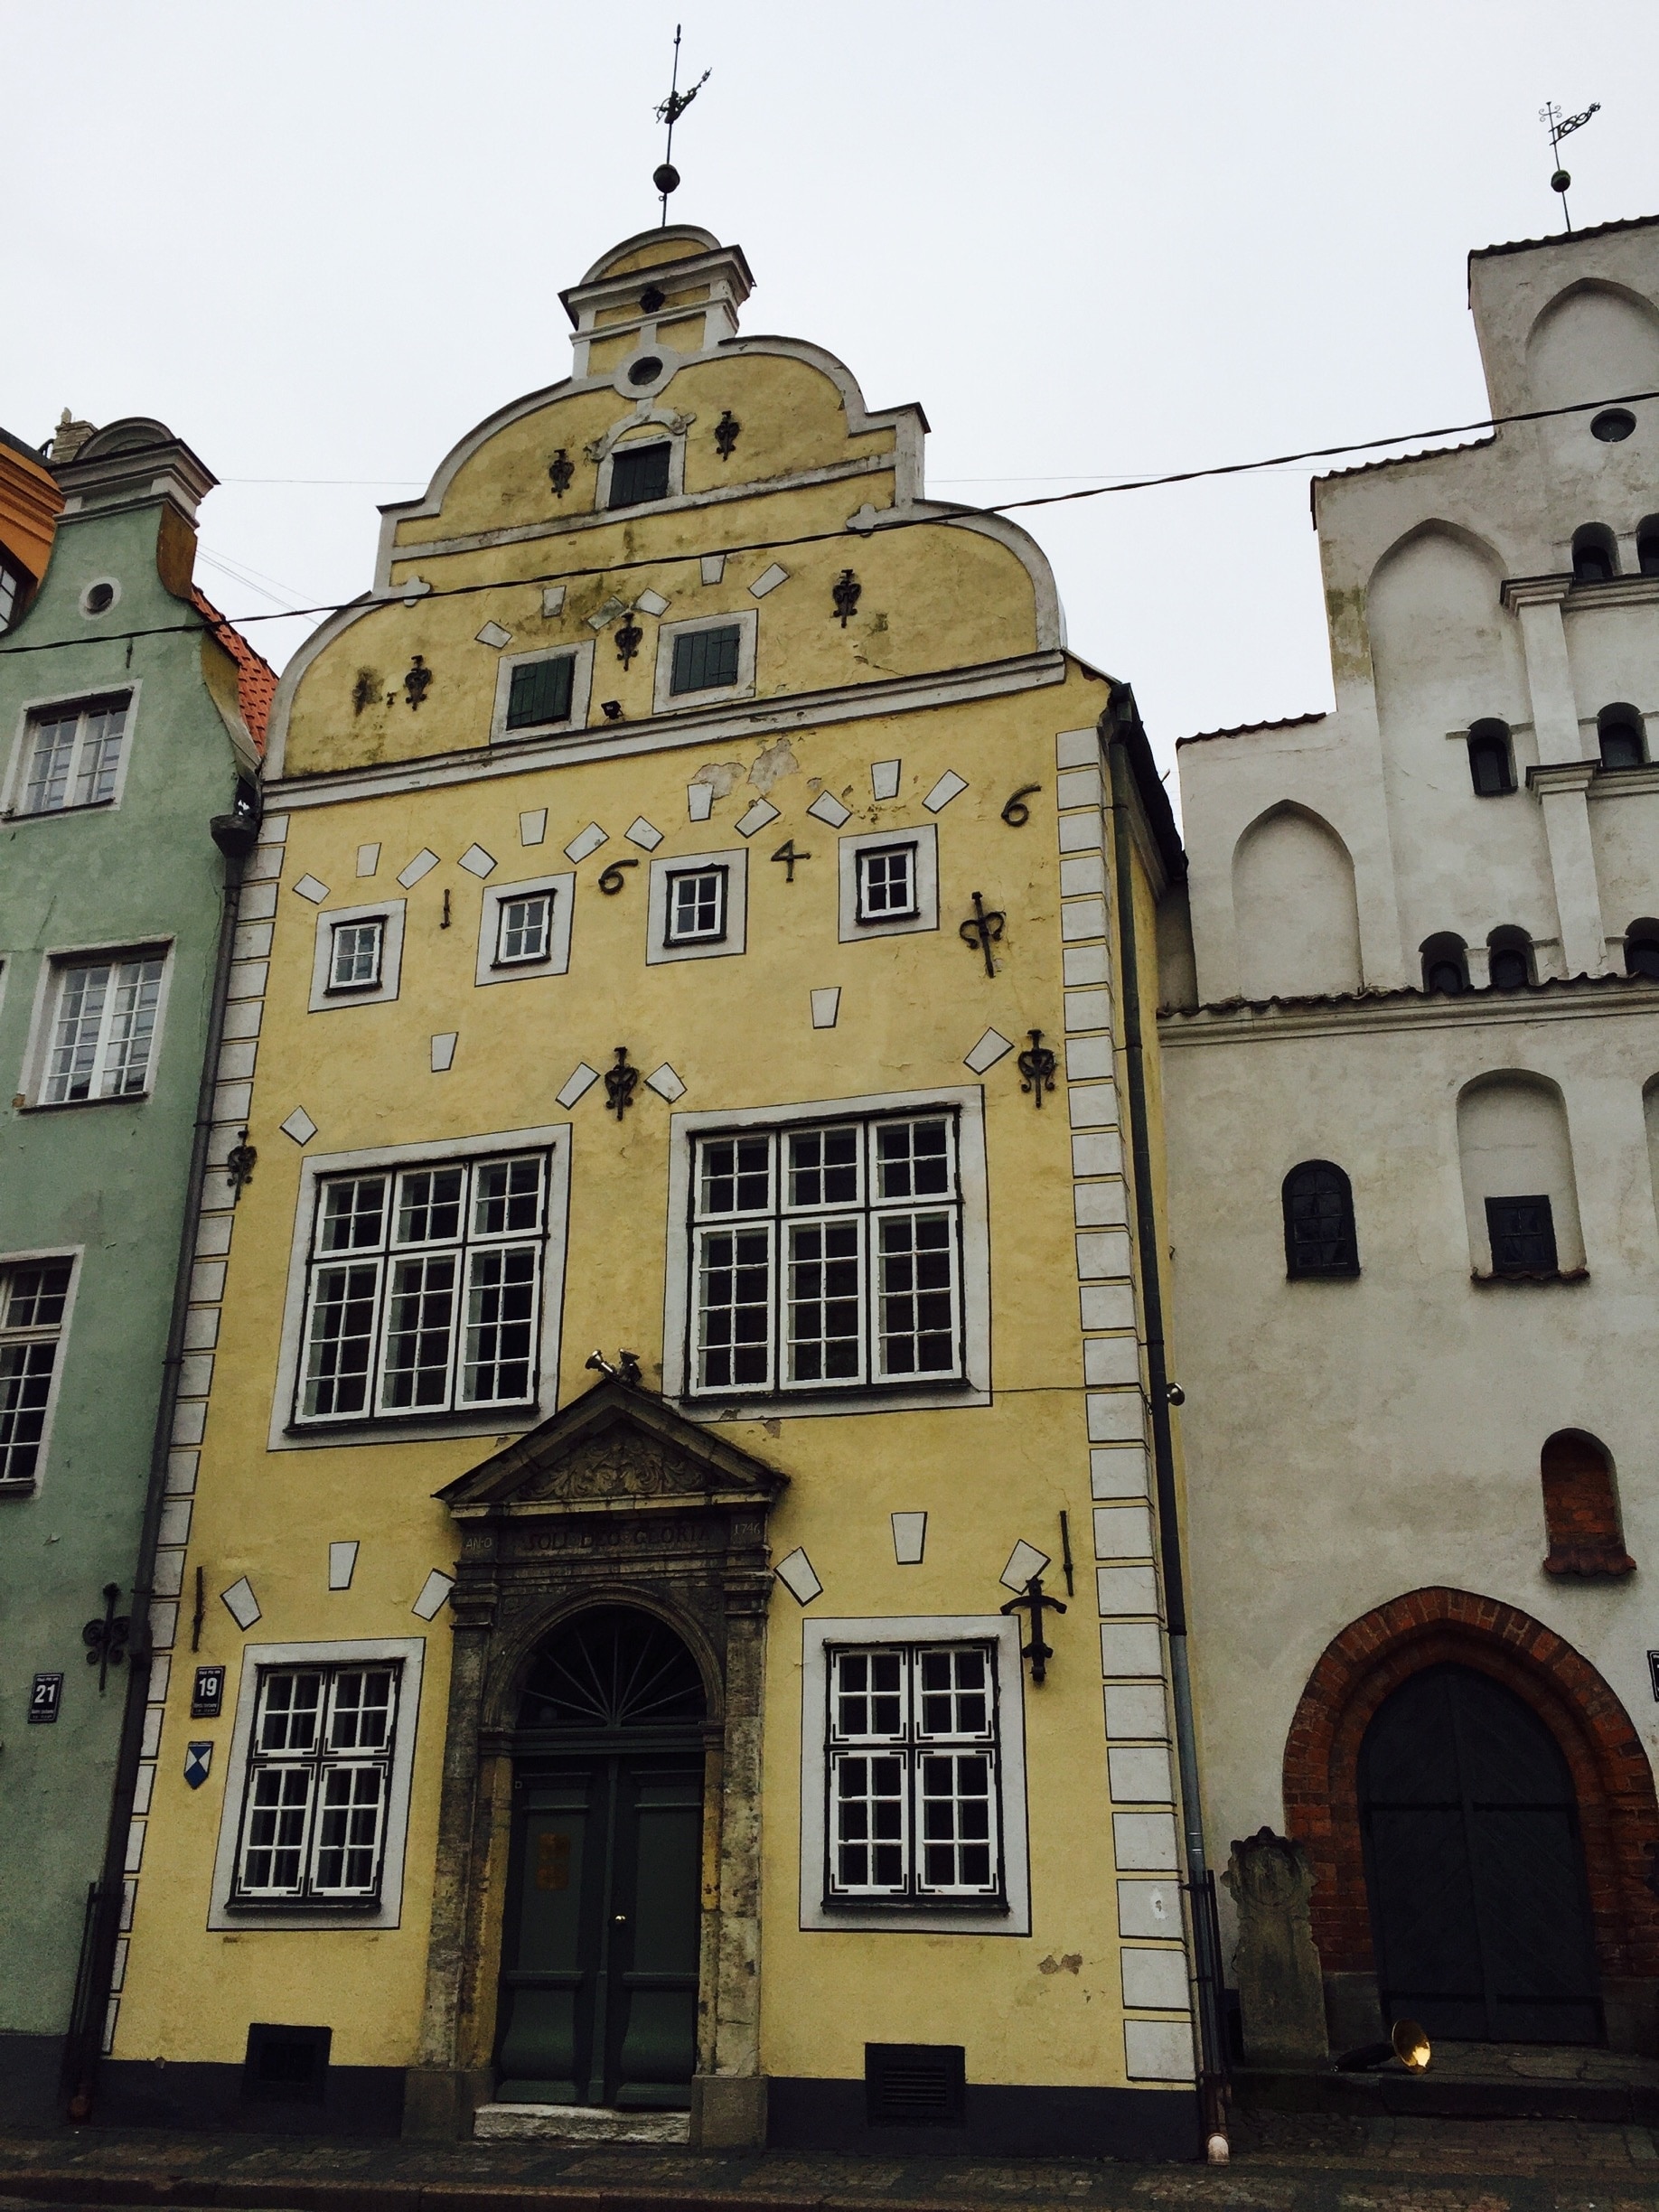 These three houses together form the oldest complex of dwellings in Riga #Three Brothers 